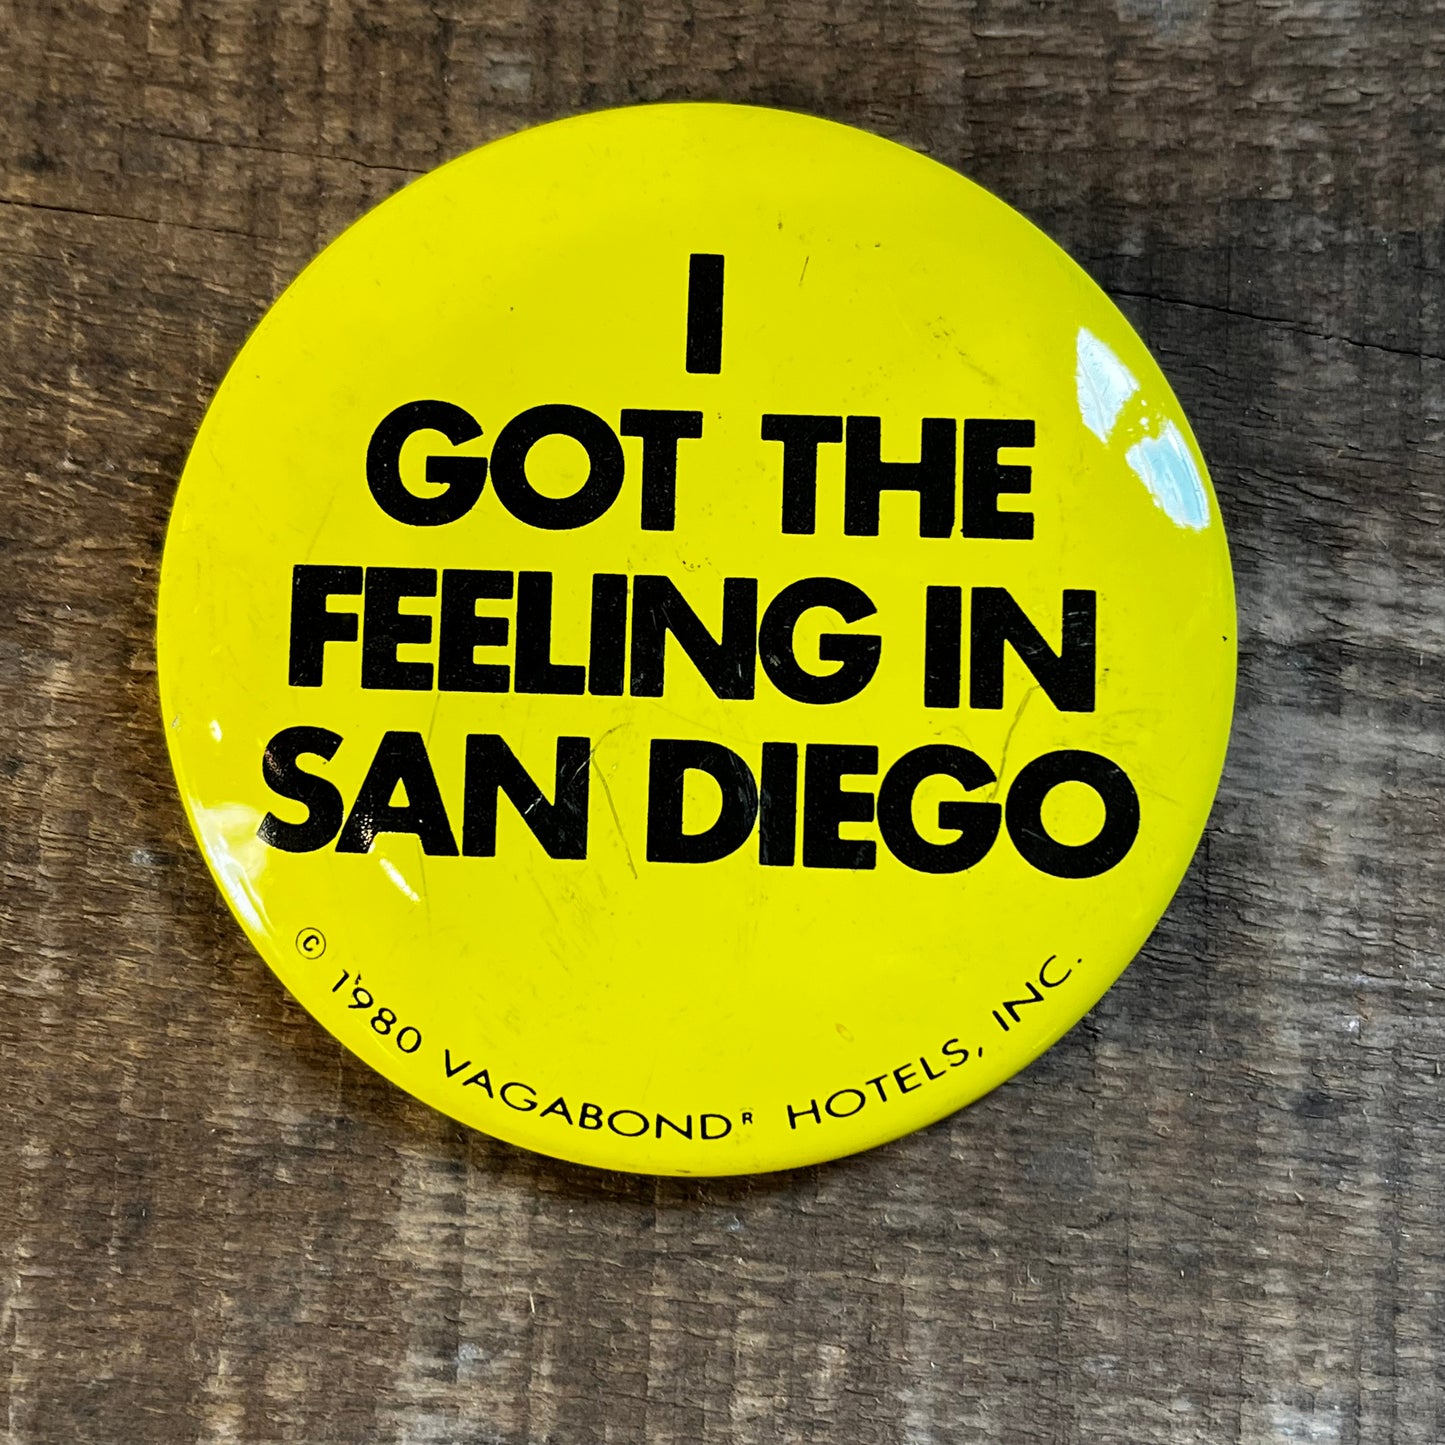 【USA vintage】I GOT THE FEELING IN SAN DIEGO  缶バッジ